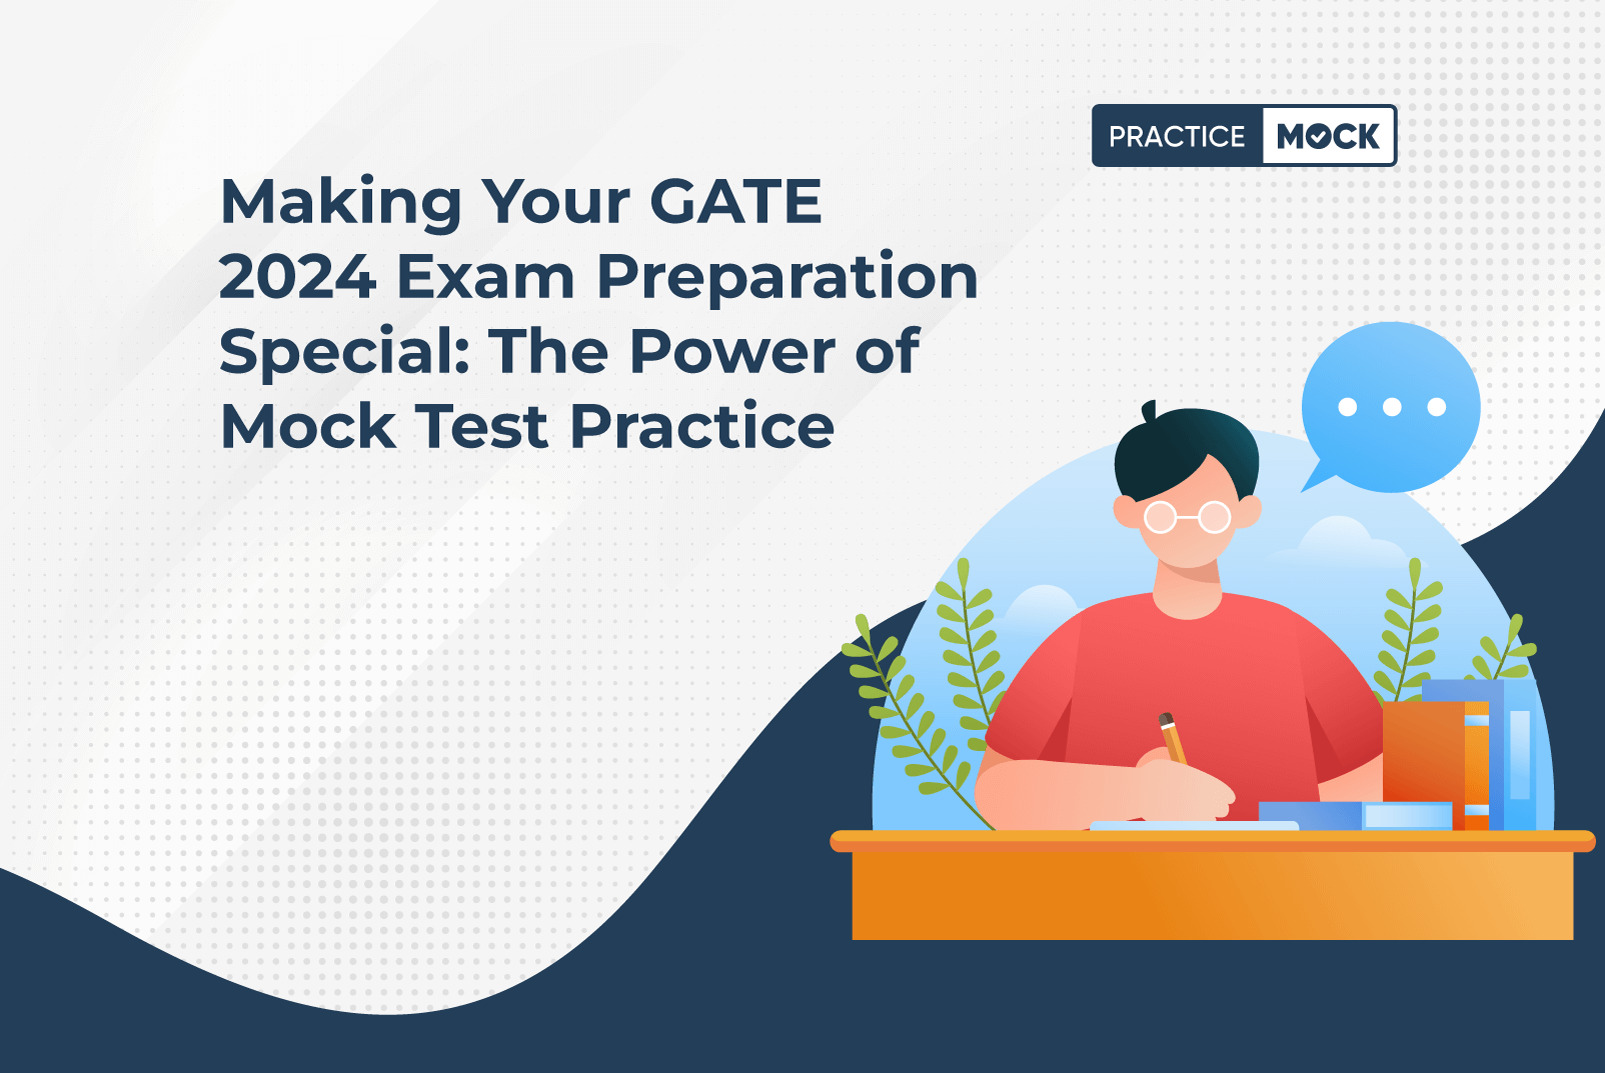 Making Your GATE 2024 Exam Preparation Special this Diwali via Mock Tests